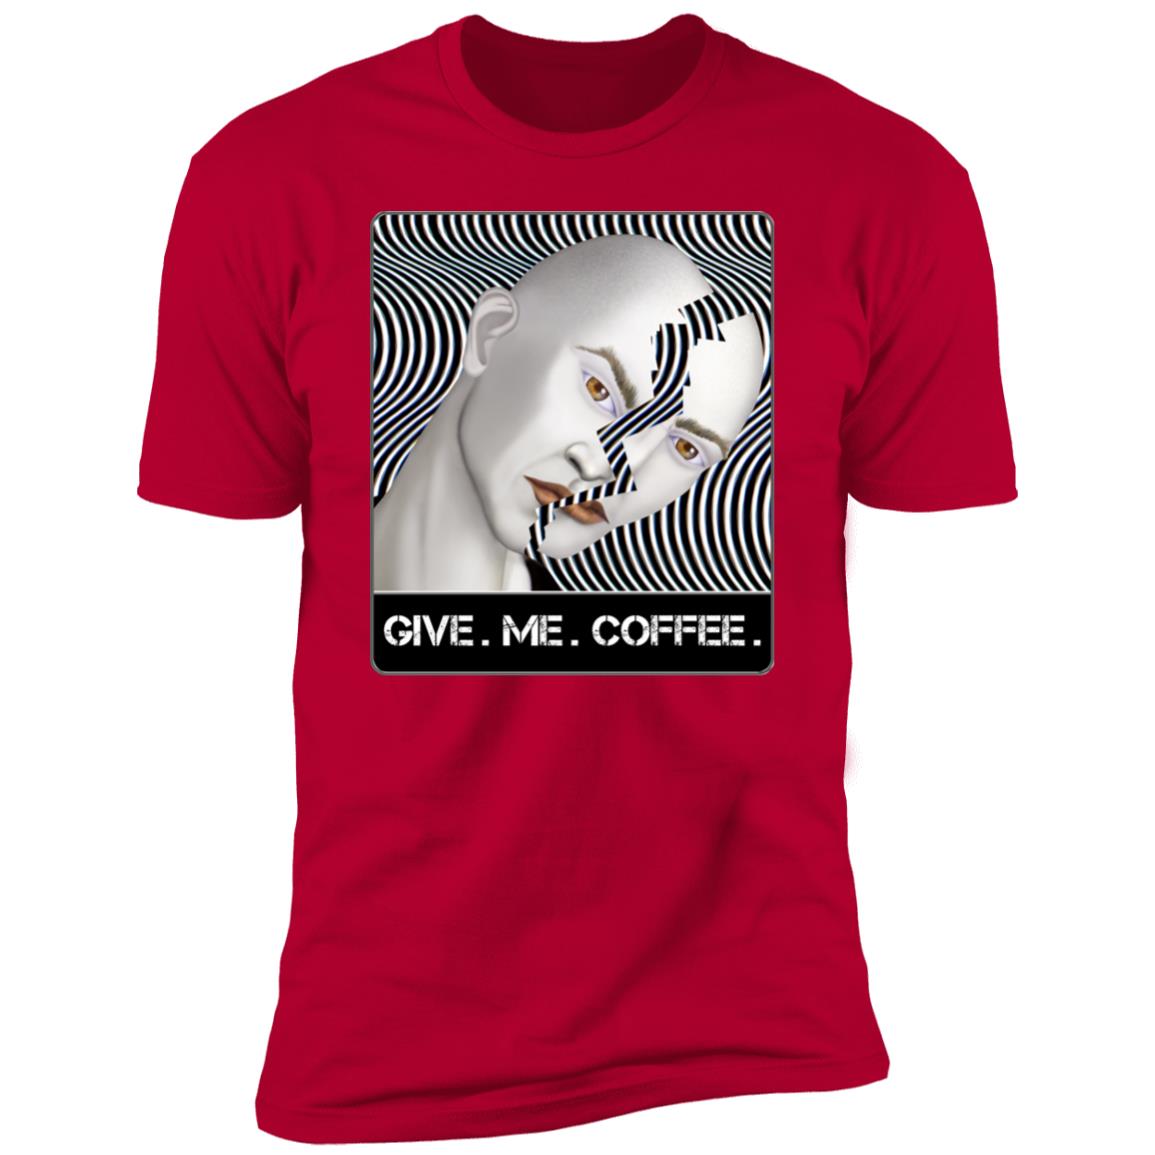 GIVE. ME. COFFEE. - Men's Premium Fitted T-Shirt